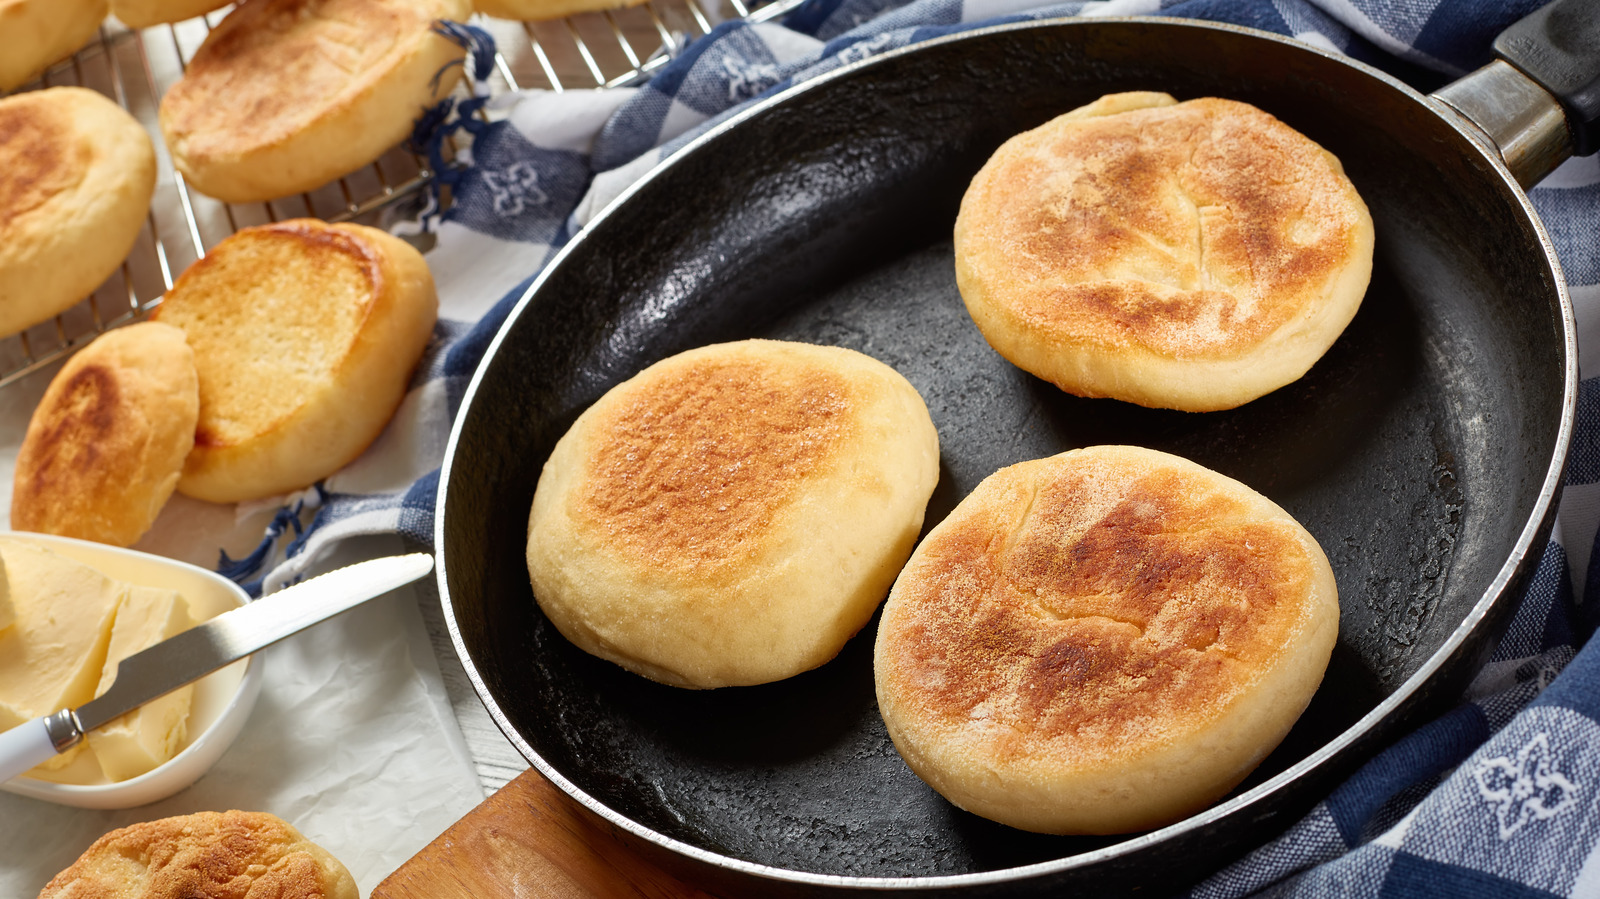 https://www.thedailymeal.com/img/gallery/the-pan-tip-you-need-to-make-better-english-muffins/l-intro-1681315385.jpg